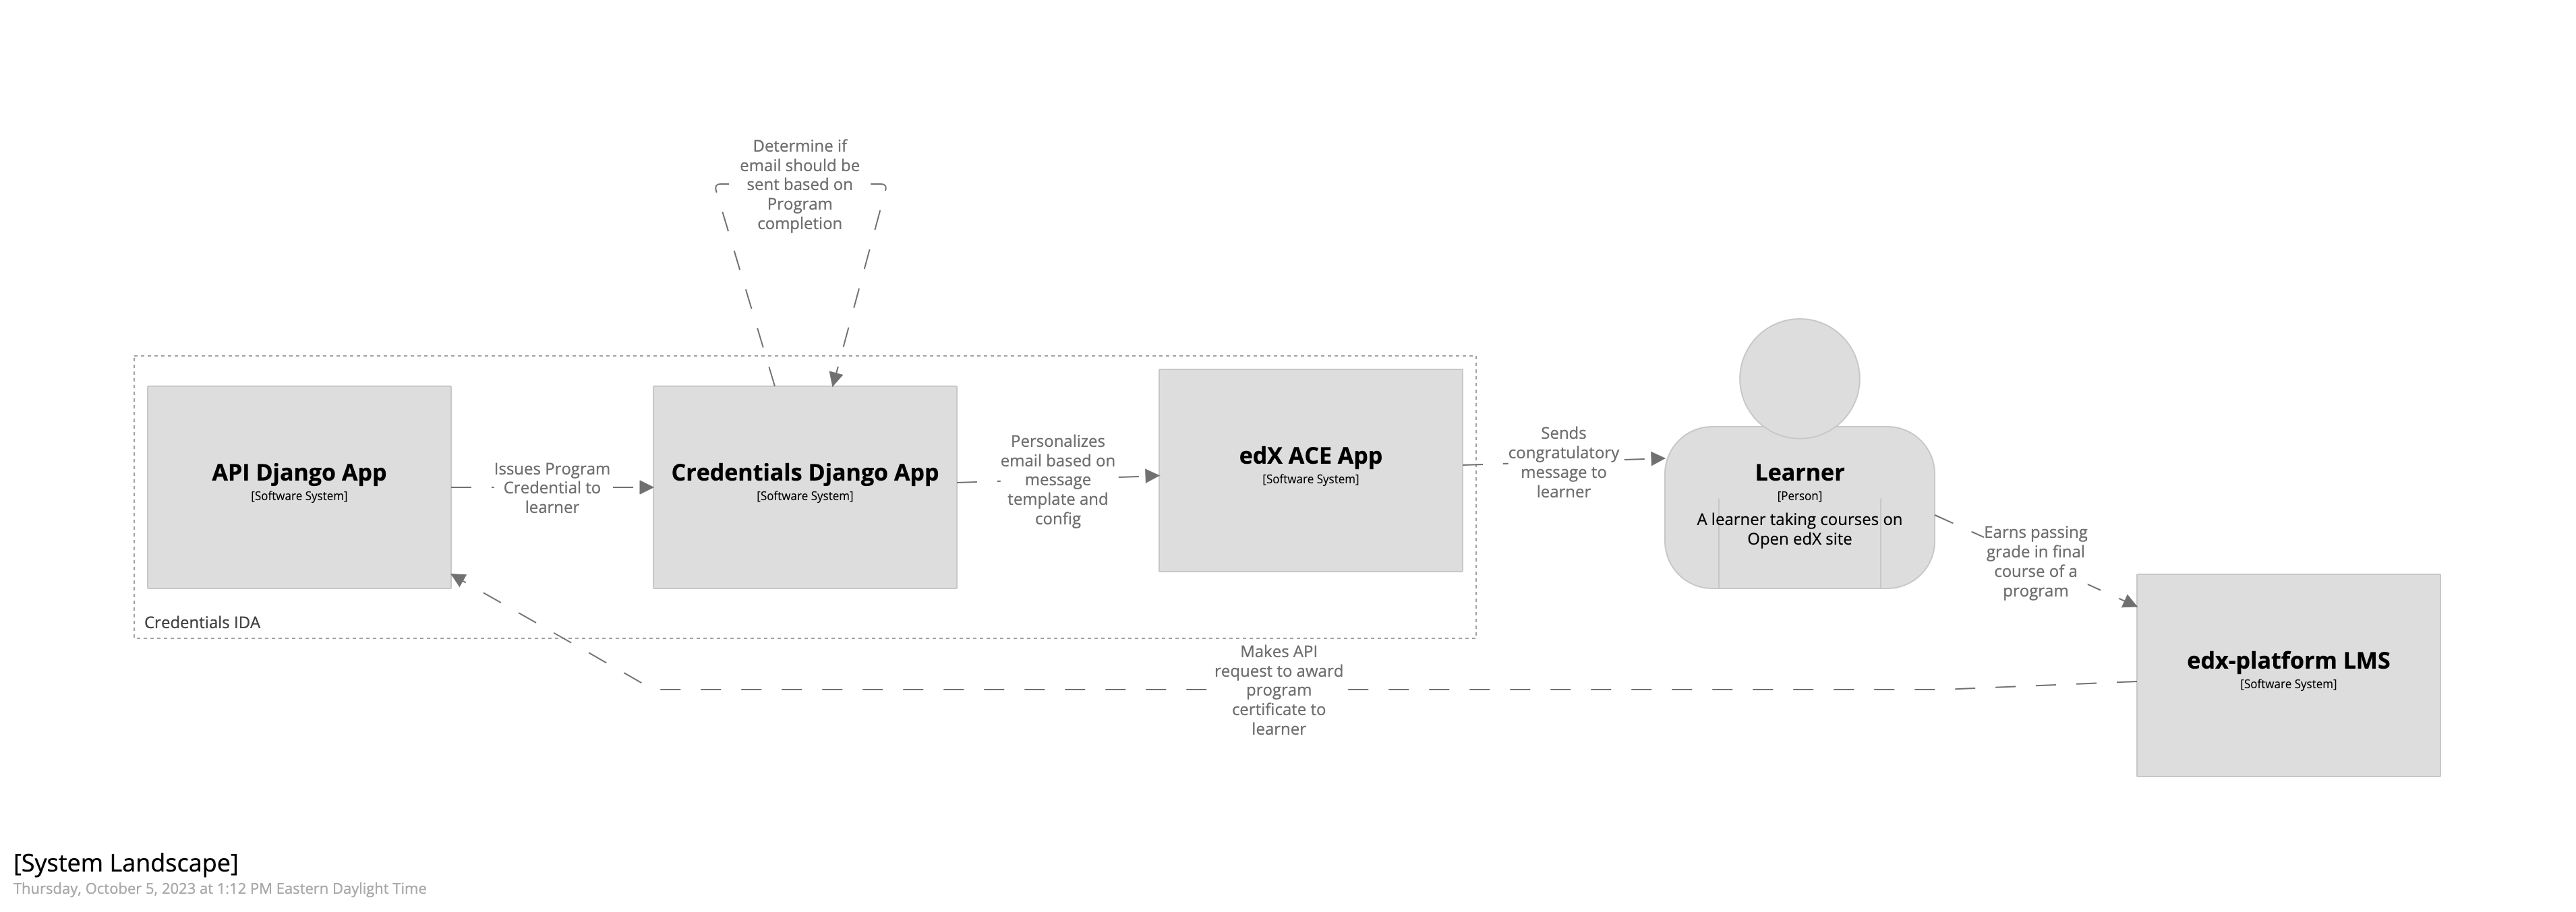 A diagram showing the components involved in sending a program completion message to a learner. A textual rendition is availalable as JSON in the document program_completion_emails.dsl, also in this repository.